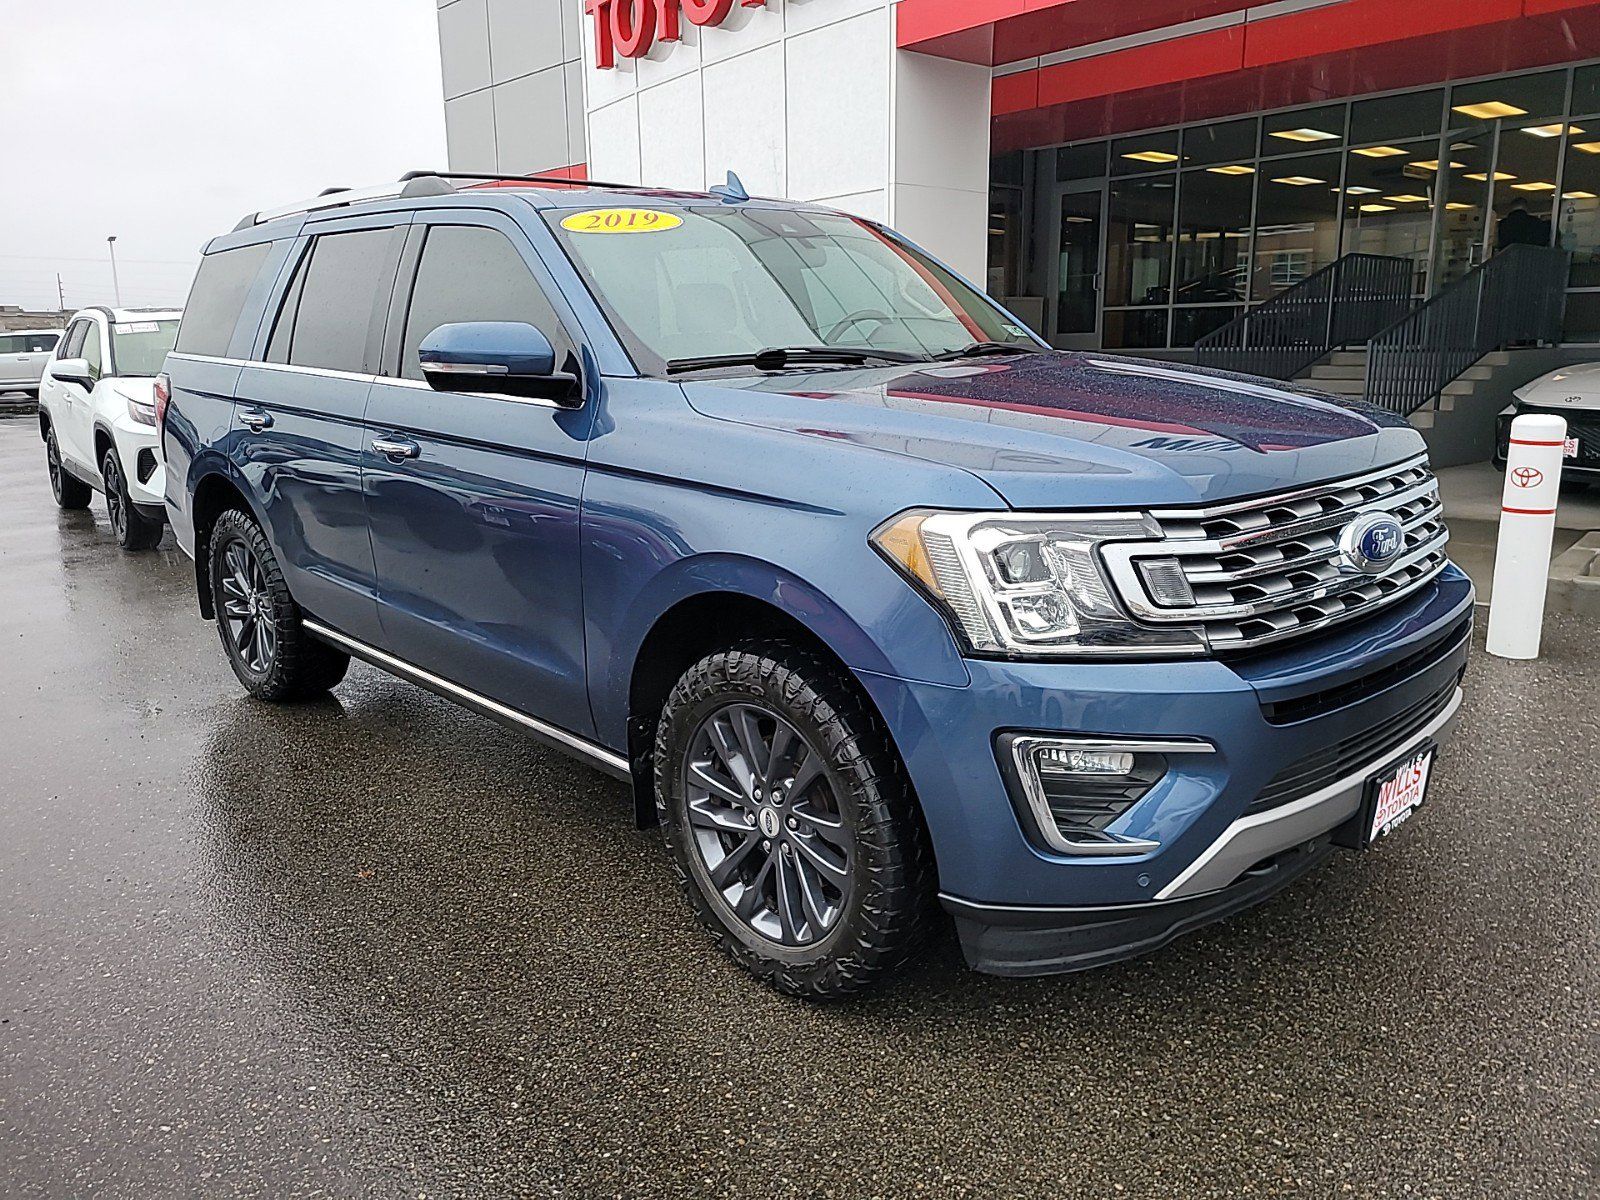 2019 - Ford - Expedition - $28,599